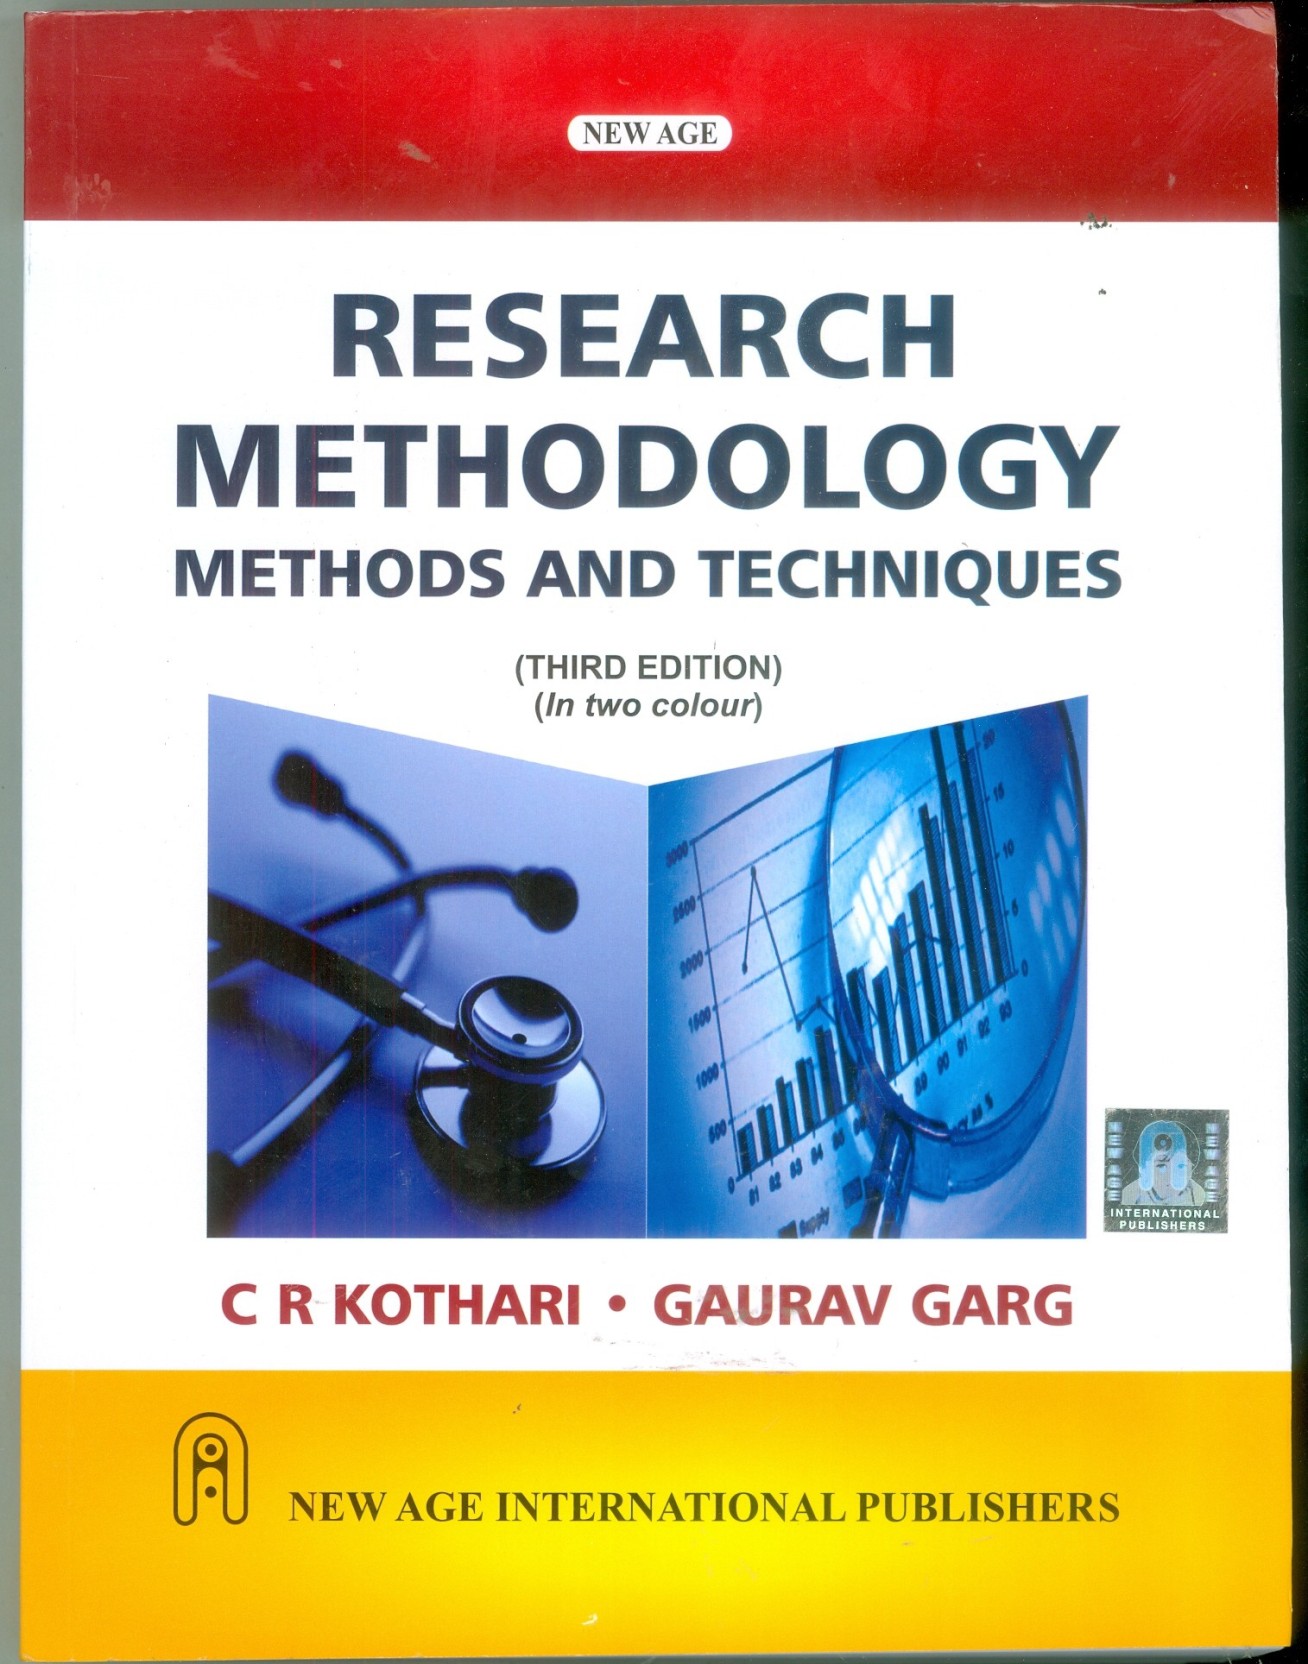 Books for research methodology